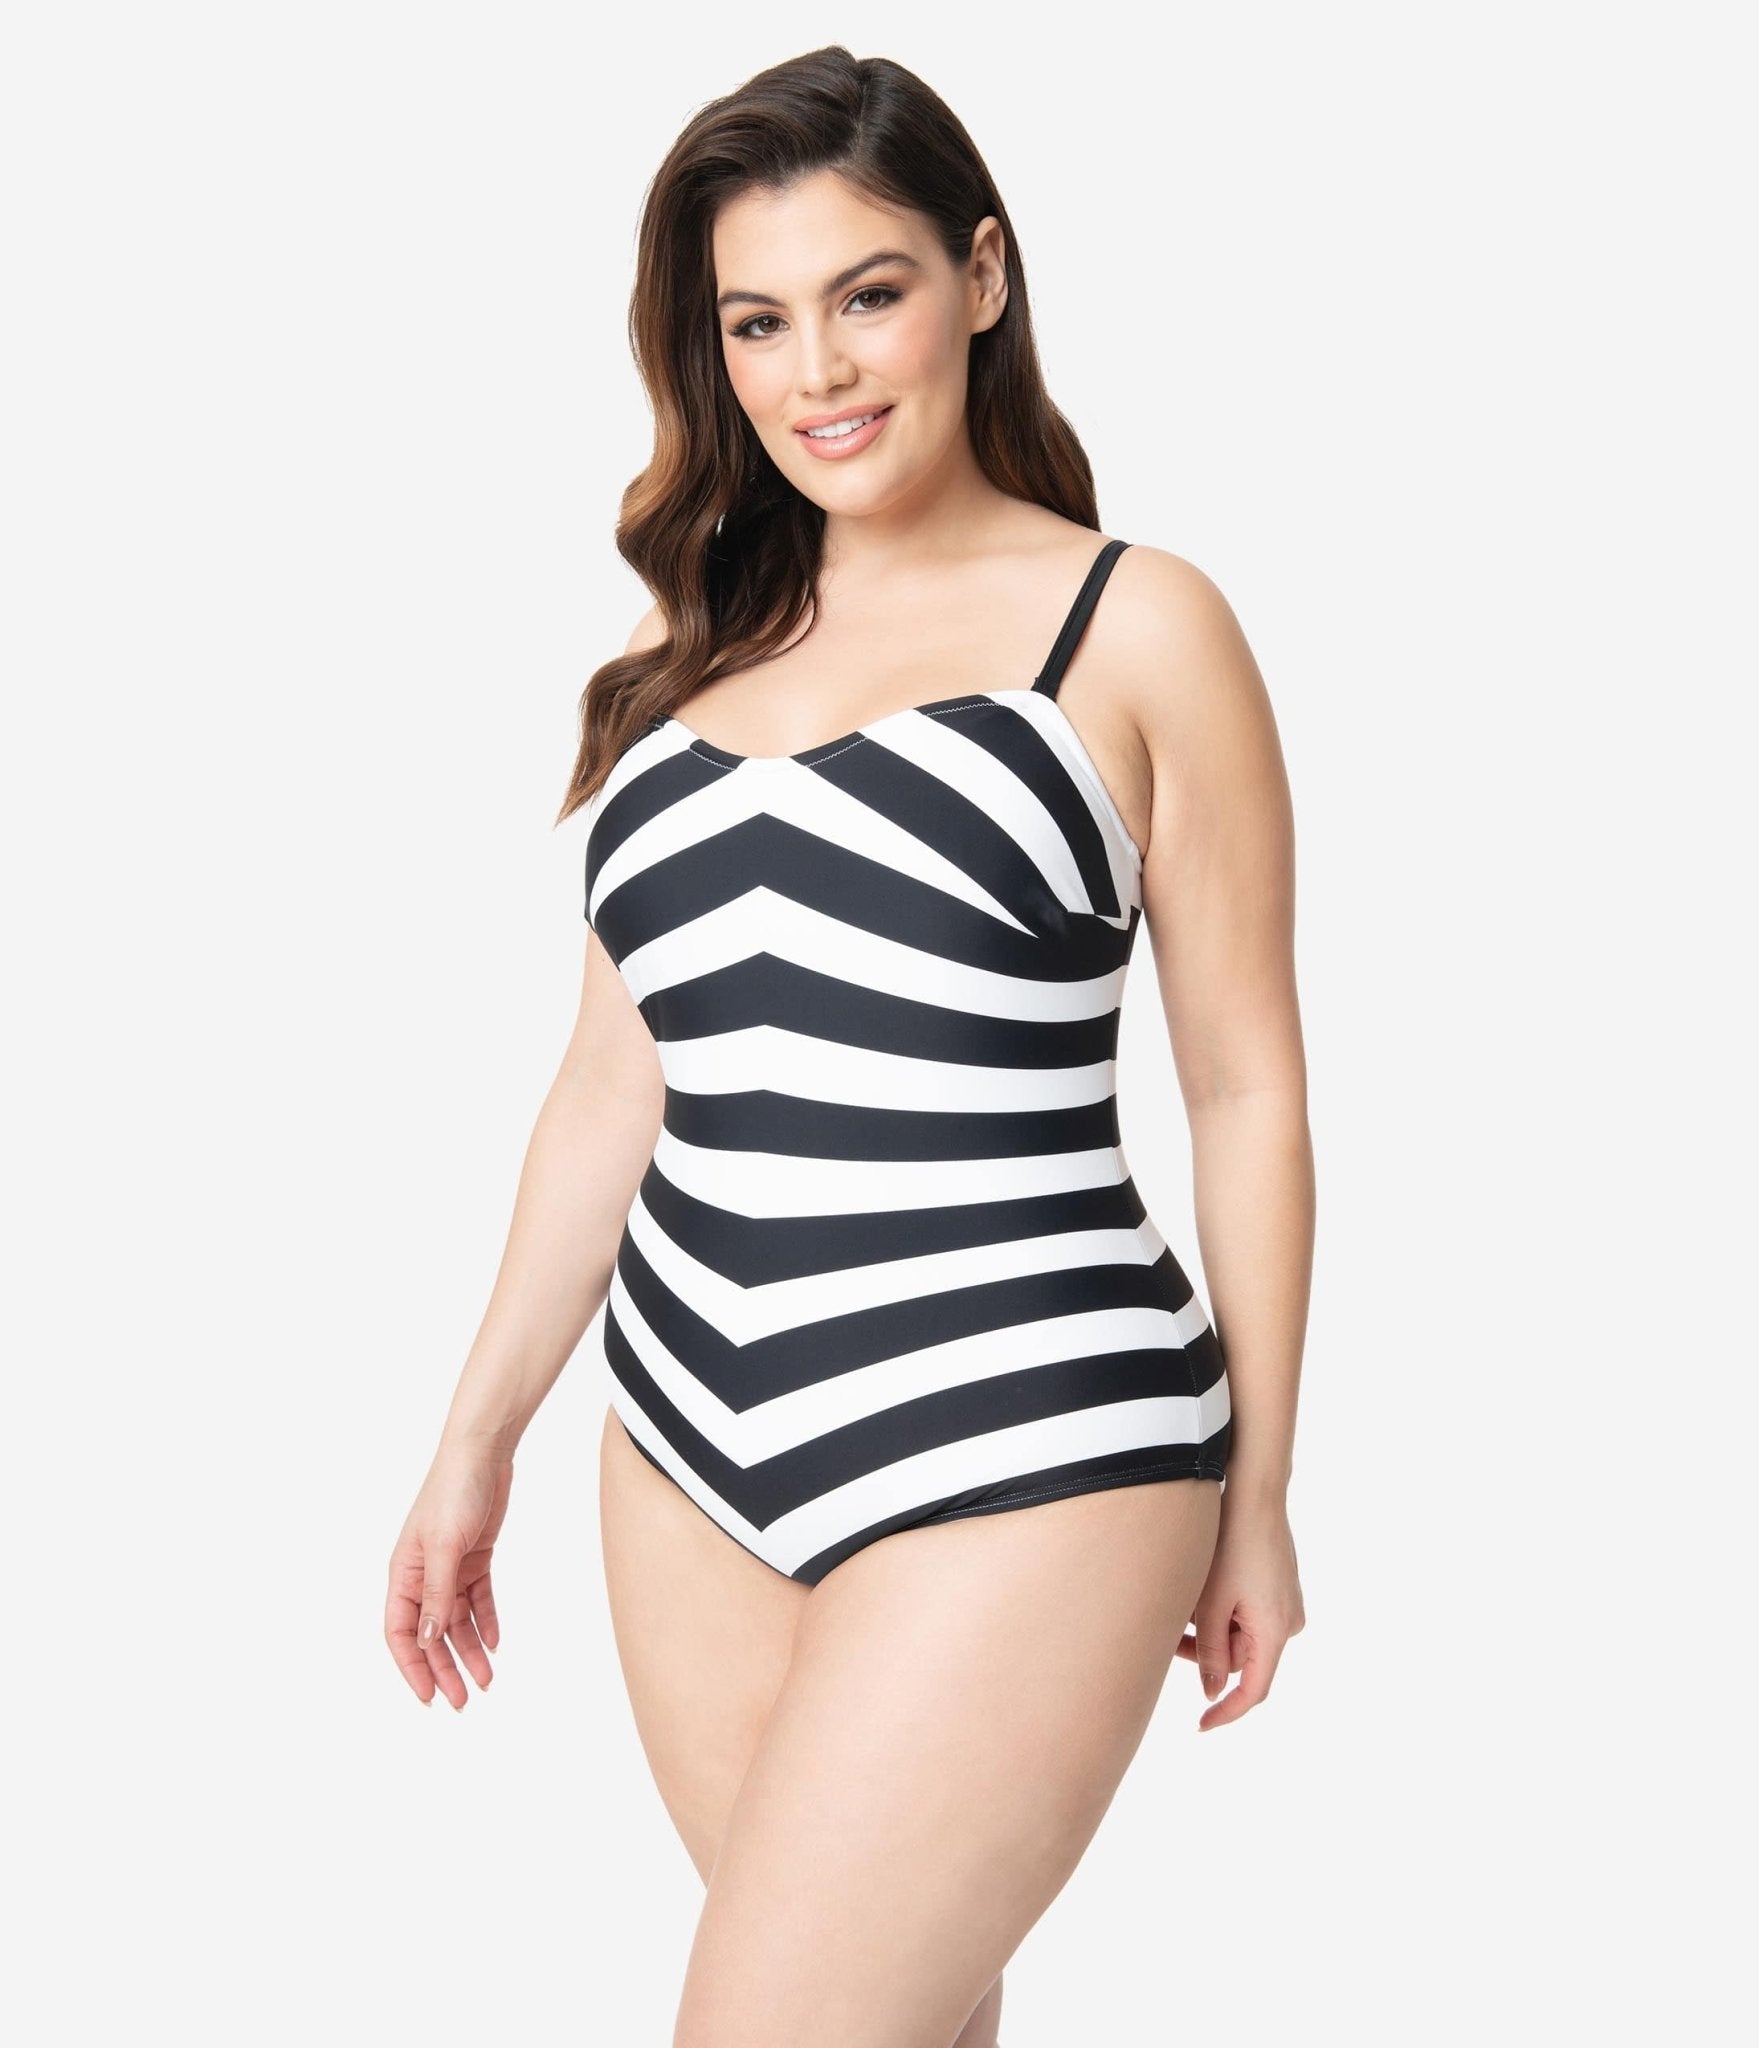 Swimsuits Woman Flat Chest - Best Price in Singapore - Mar 2024